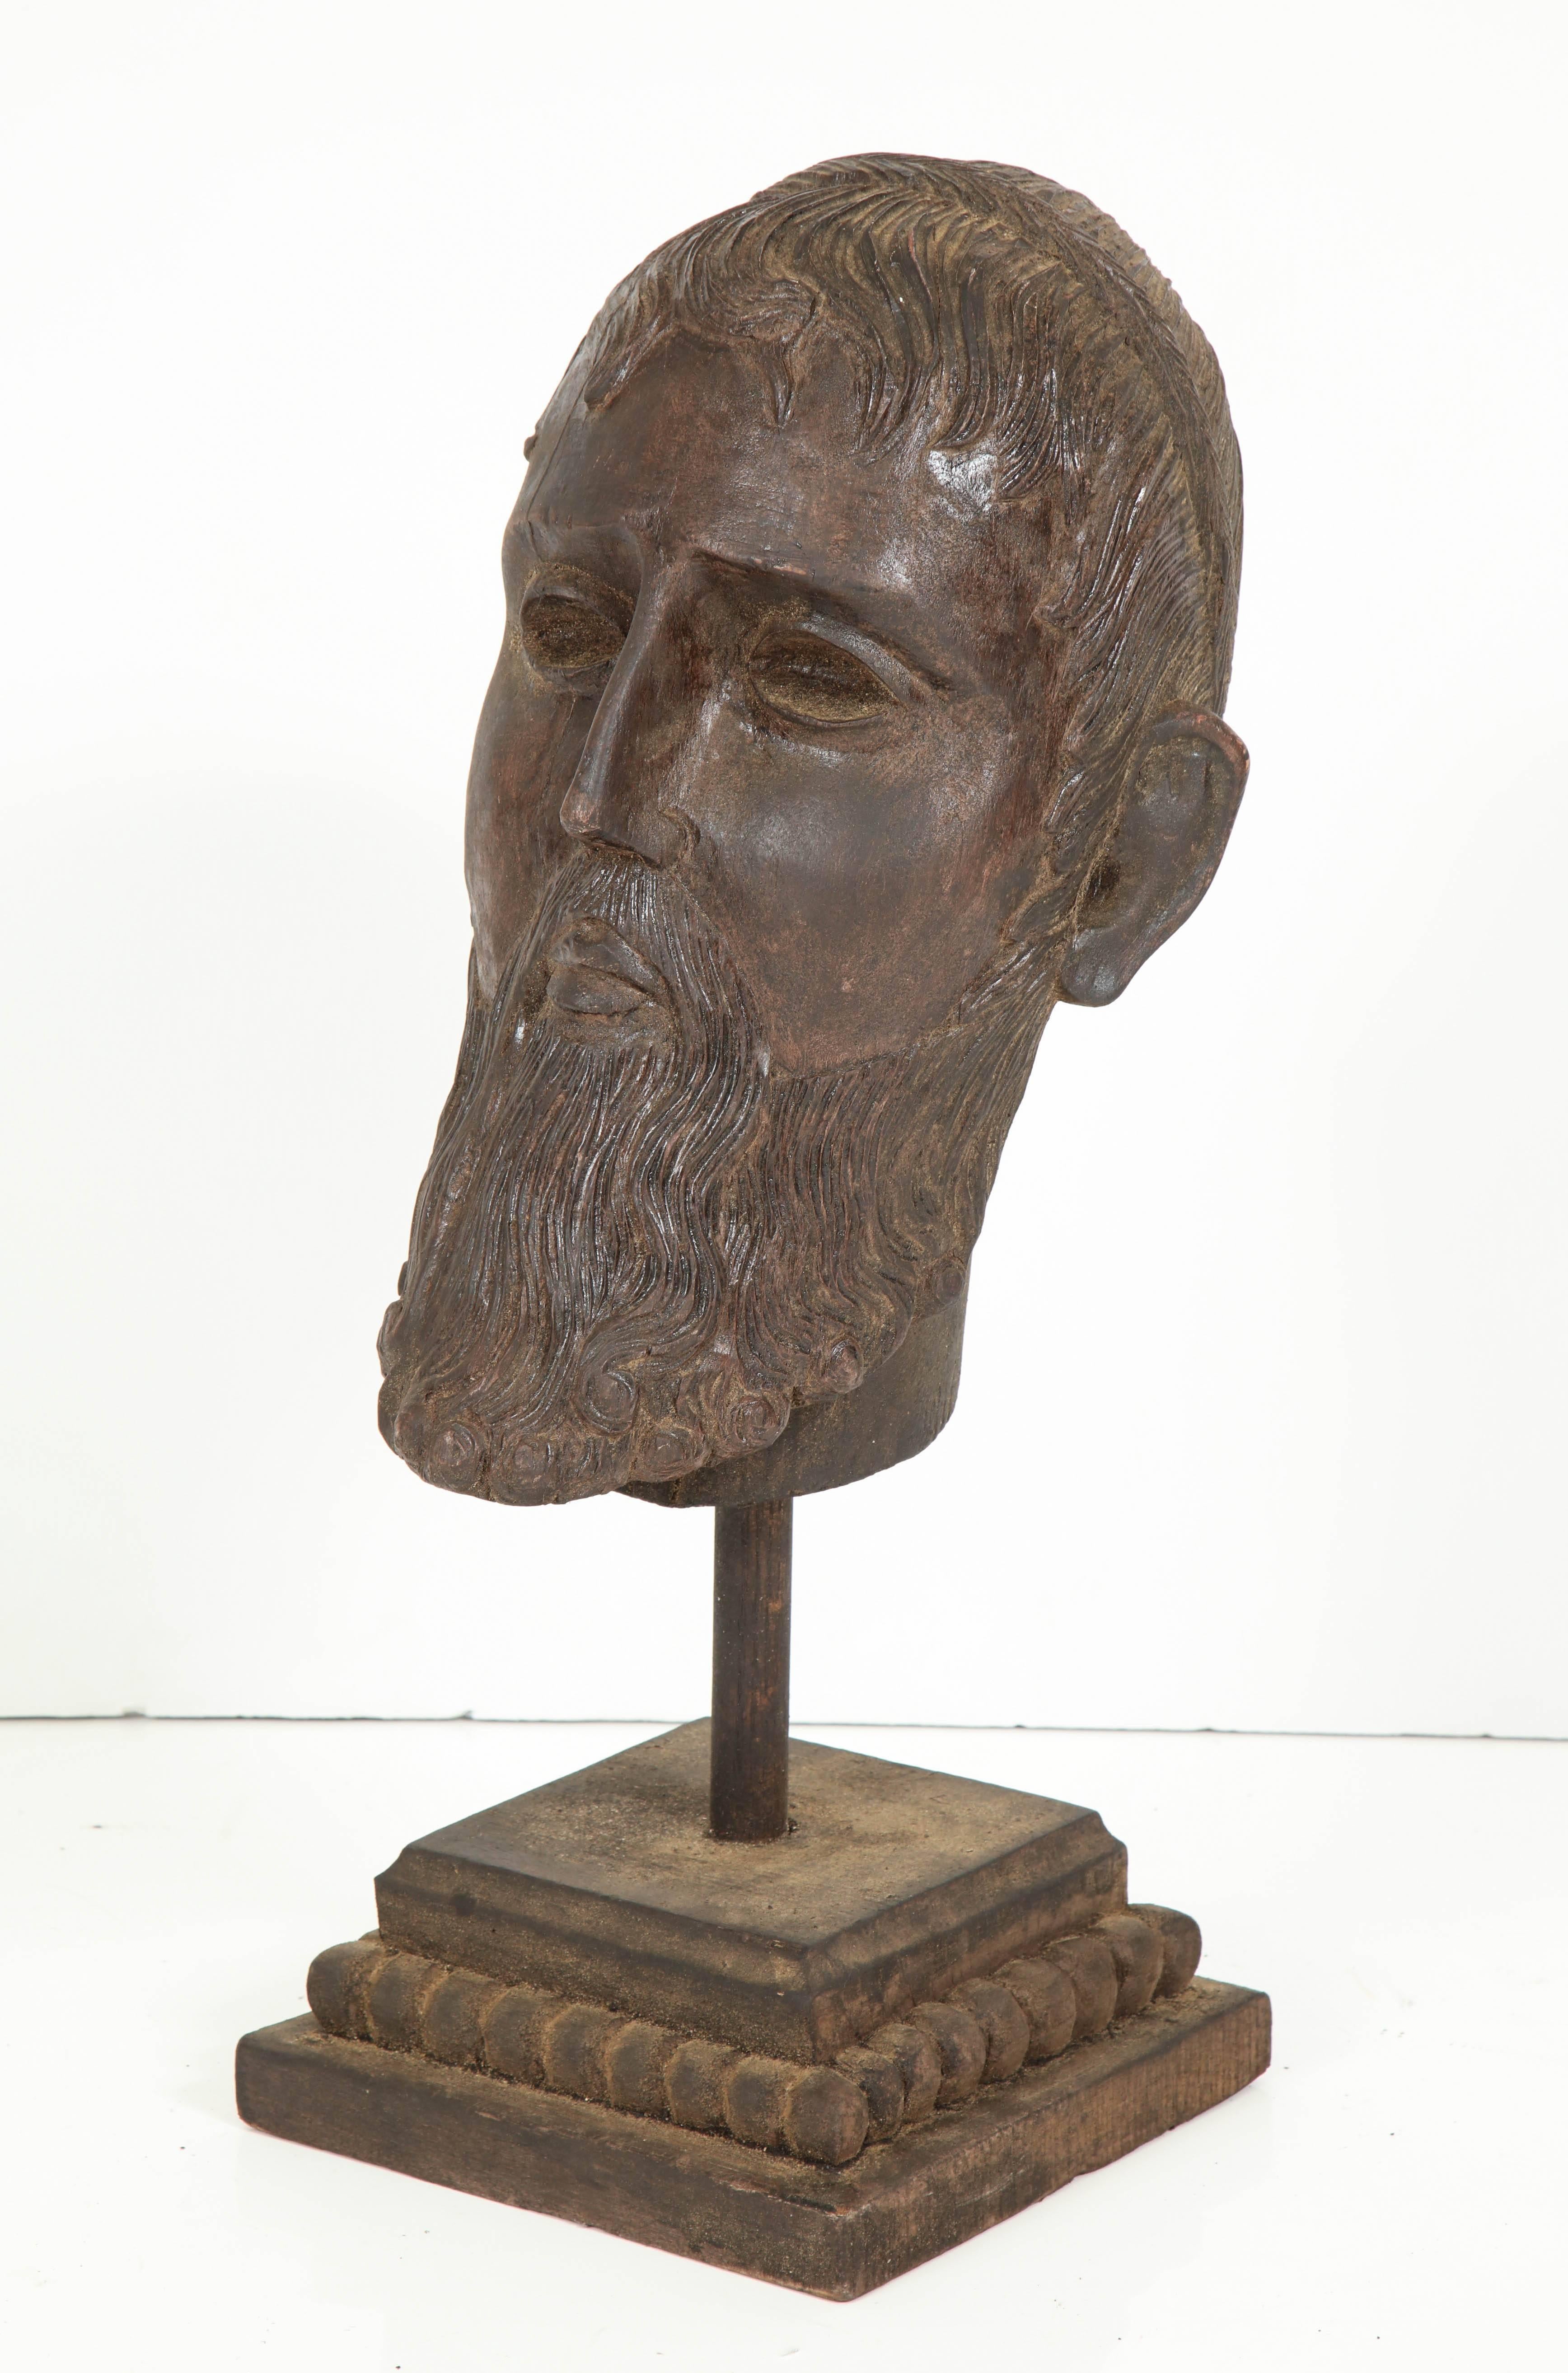 A large, lifesize head carving in the style of Classic Greek figures. The head appears to have been removed from a statue and paced on a more recent base. I think the head is late 19th century possibly.